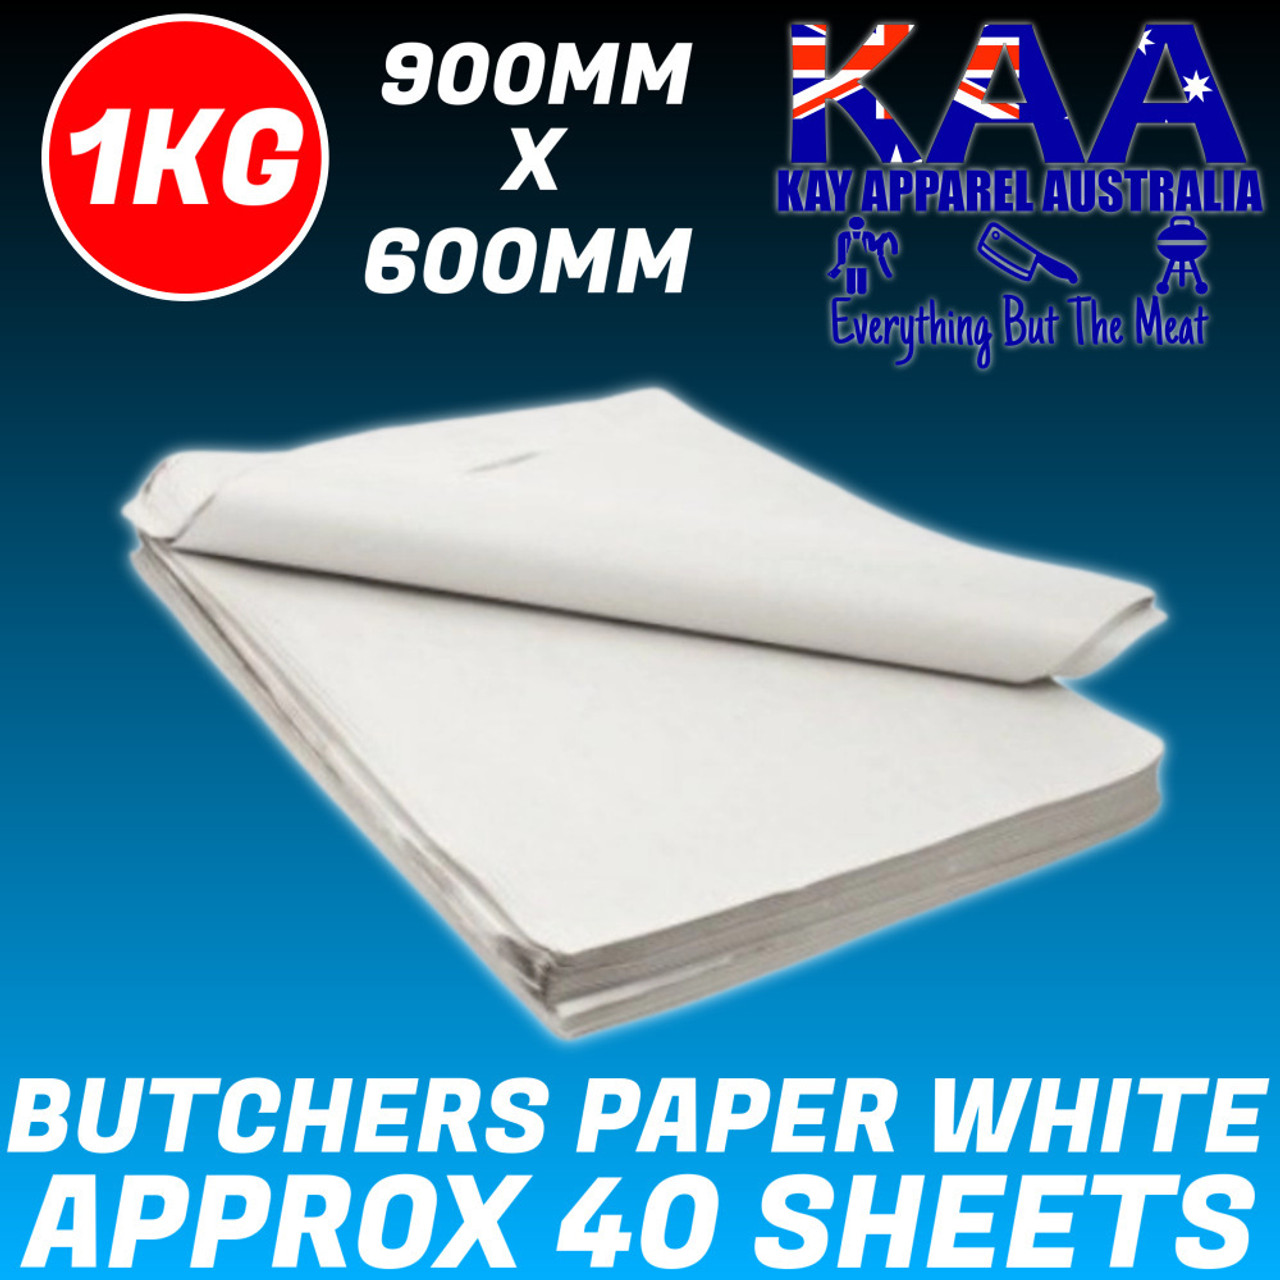 Butchers Paper 1KG 900x600mm White - Kay Apparel Aprons And Home Butchers  Supplies